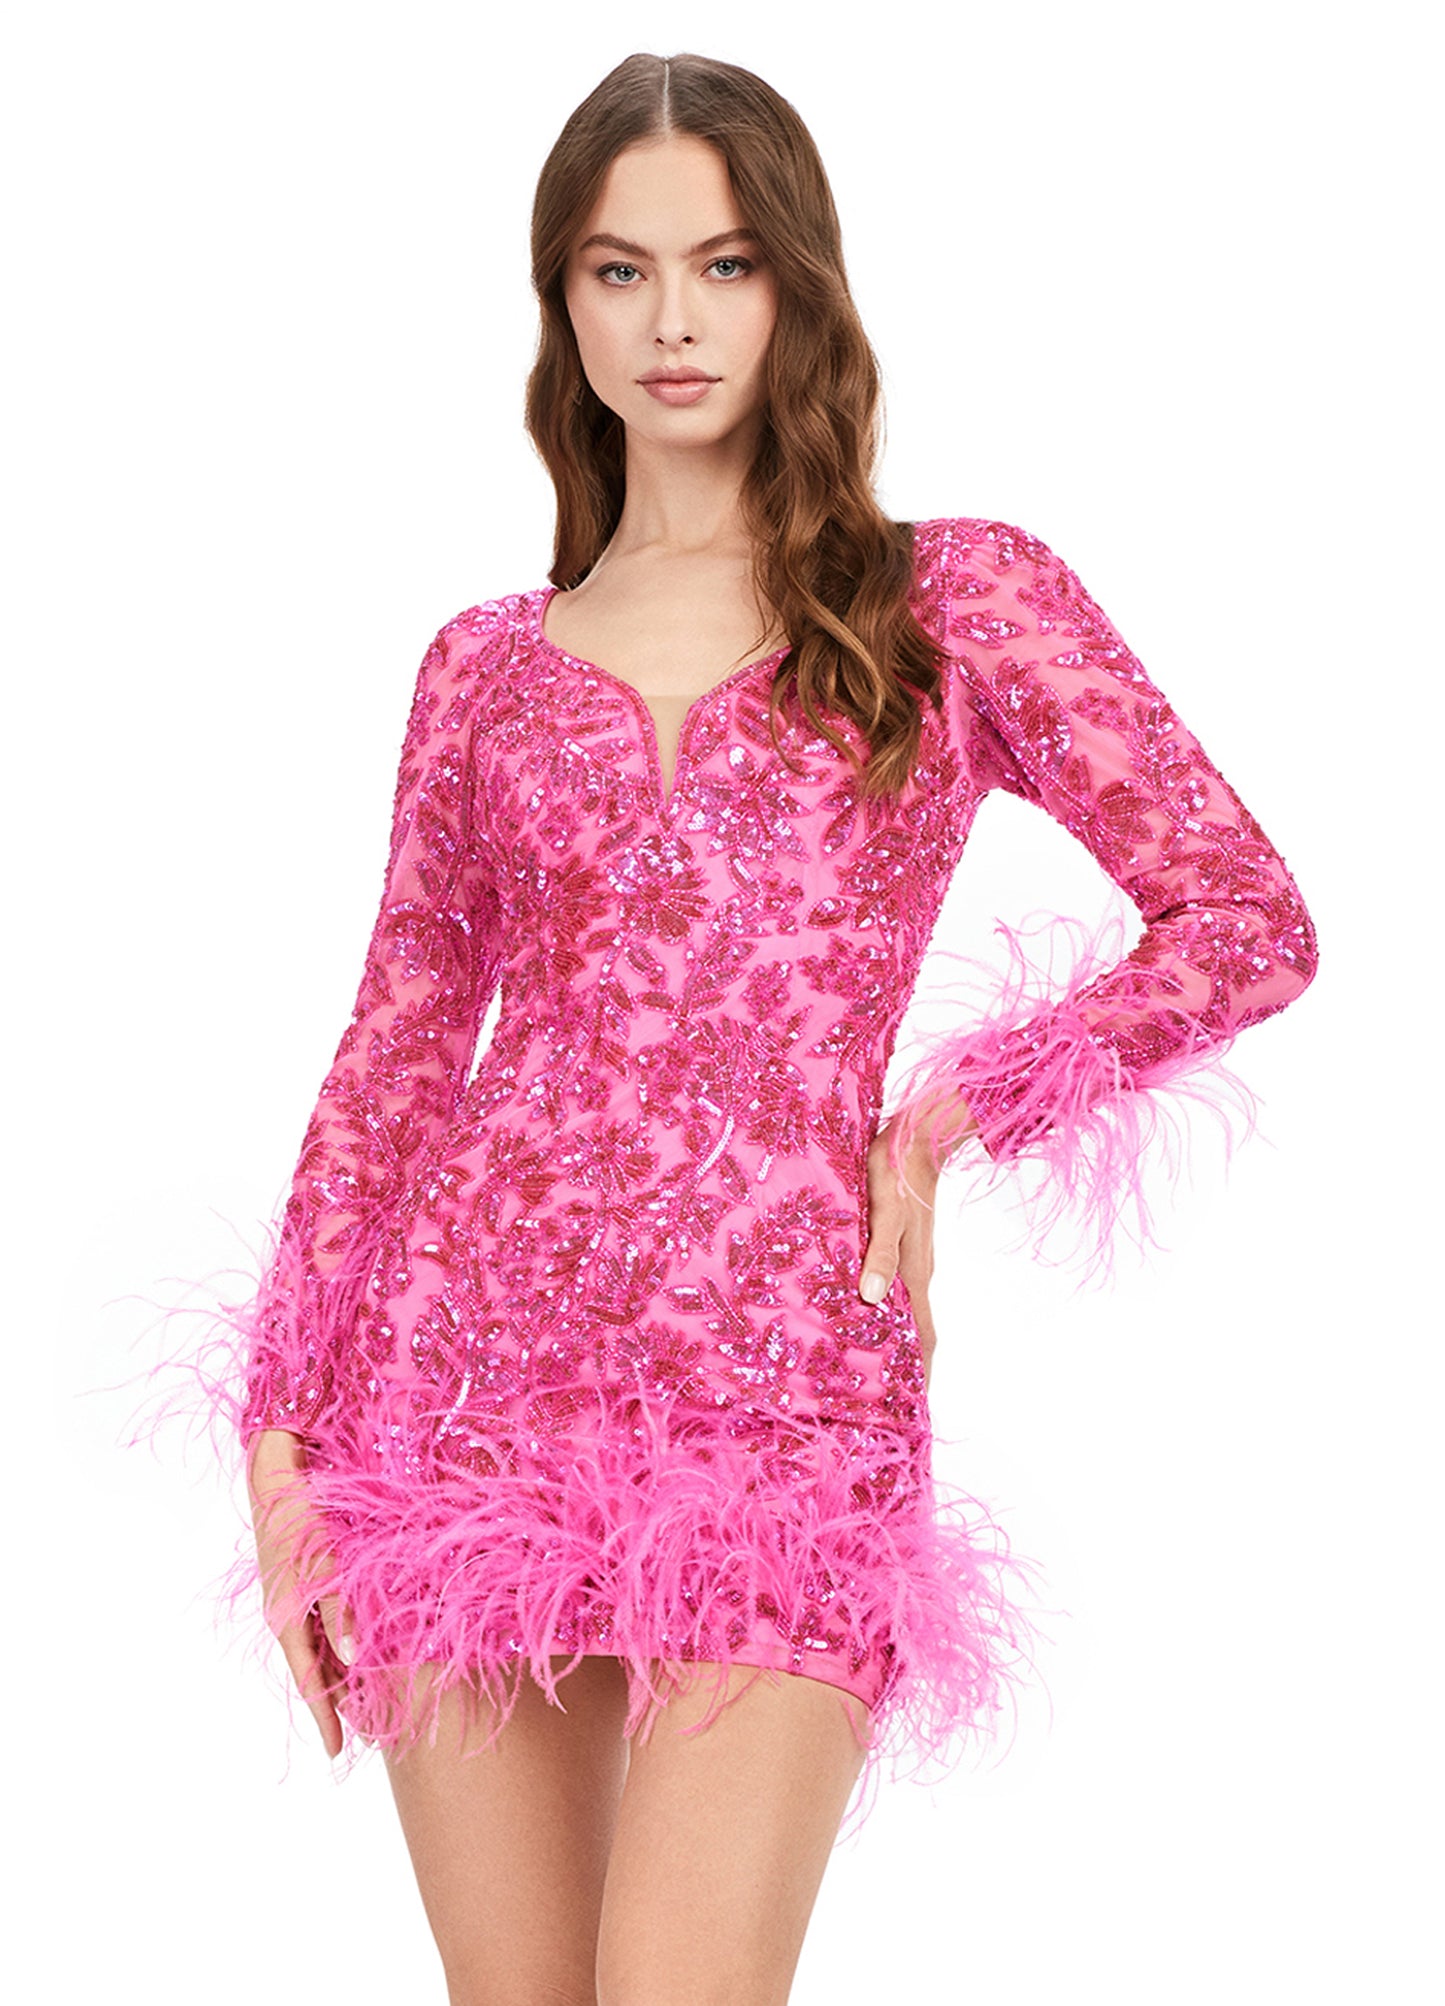 Ashley Lauren 4616 Long Sleeve Feather Detail Sequin V-Neck Open Back Cocktail Homecoming Dress. Feel luxurious in this fully sequin, open back cocktail dress. We added the perfect amount of drama with feathers along the skirt and sleeves of this dress.